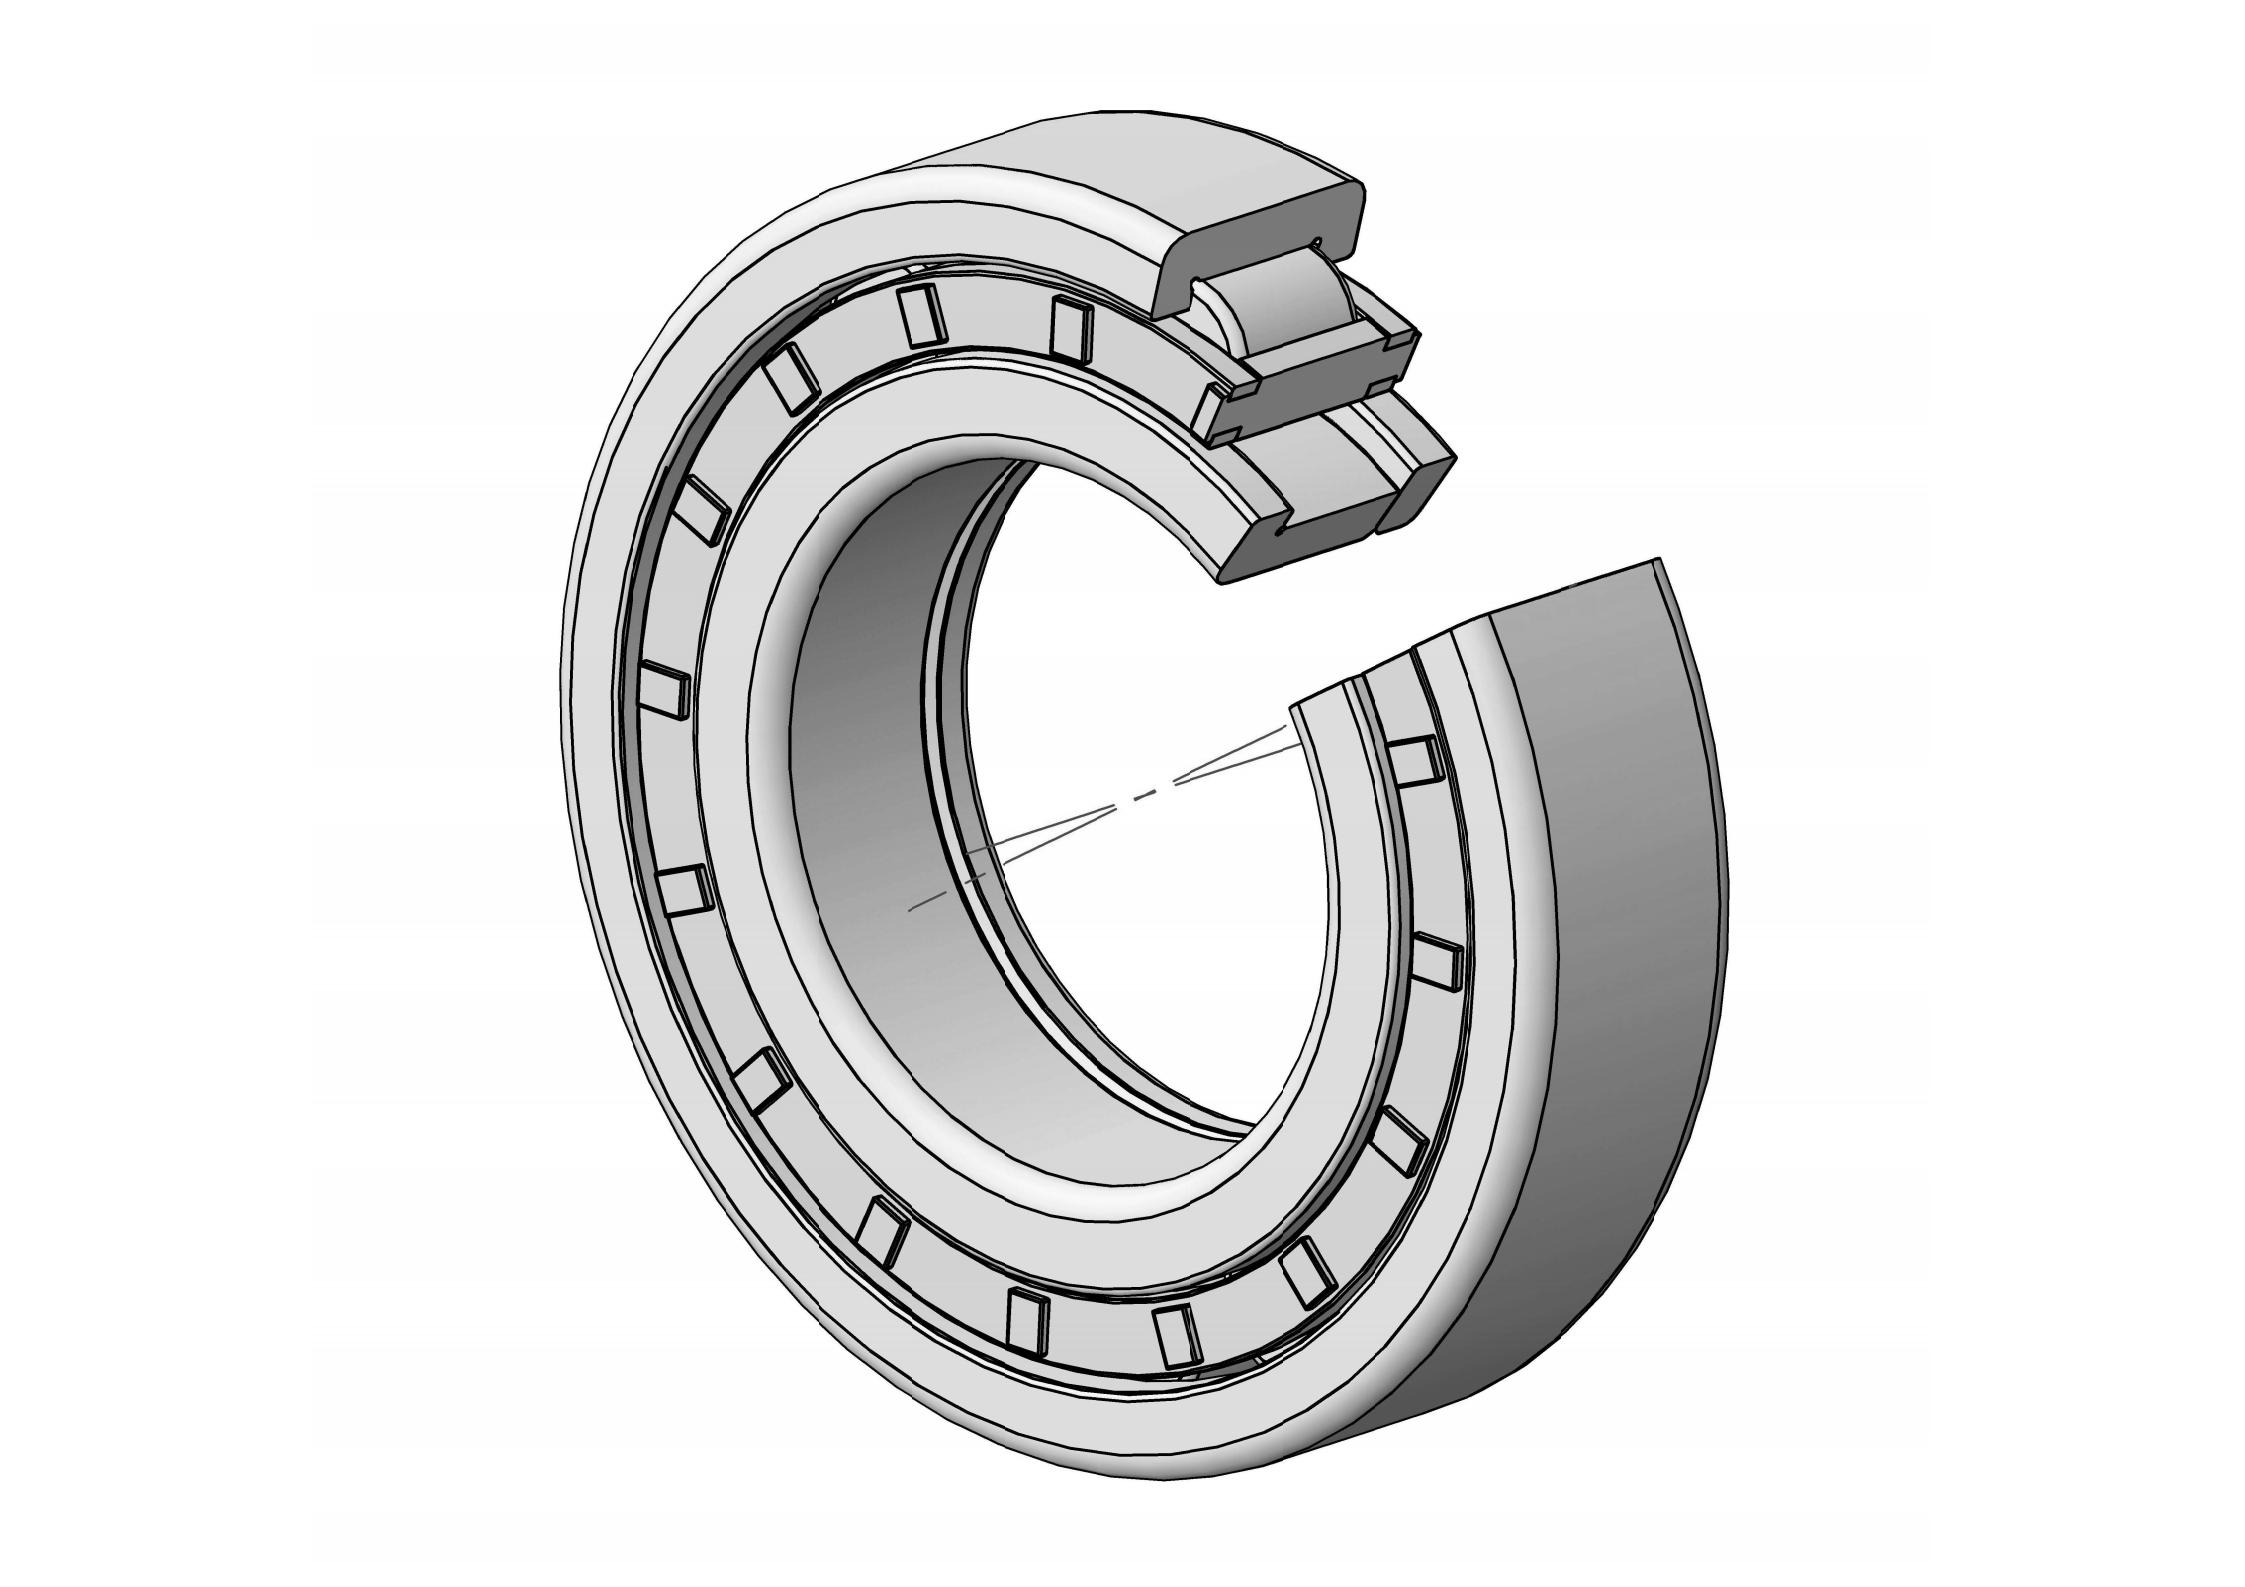 NUP236-EM Single Row Cylindrical roller bearing 